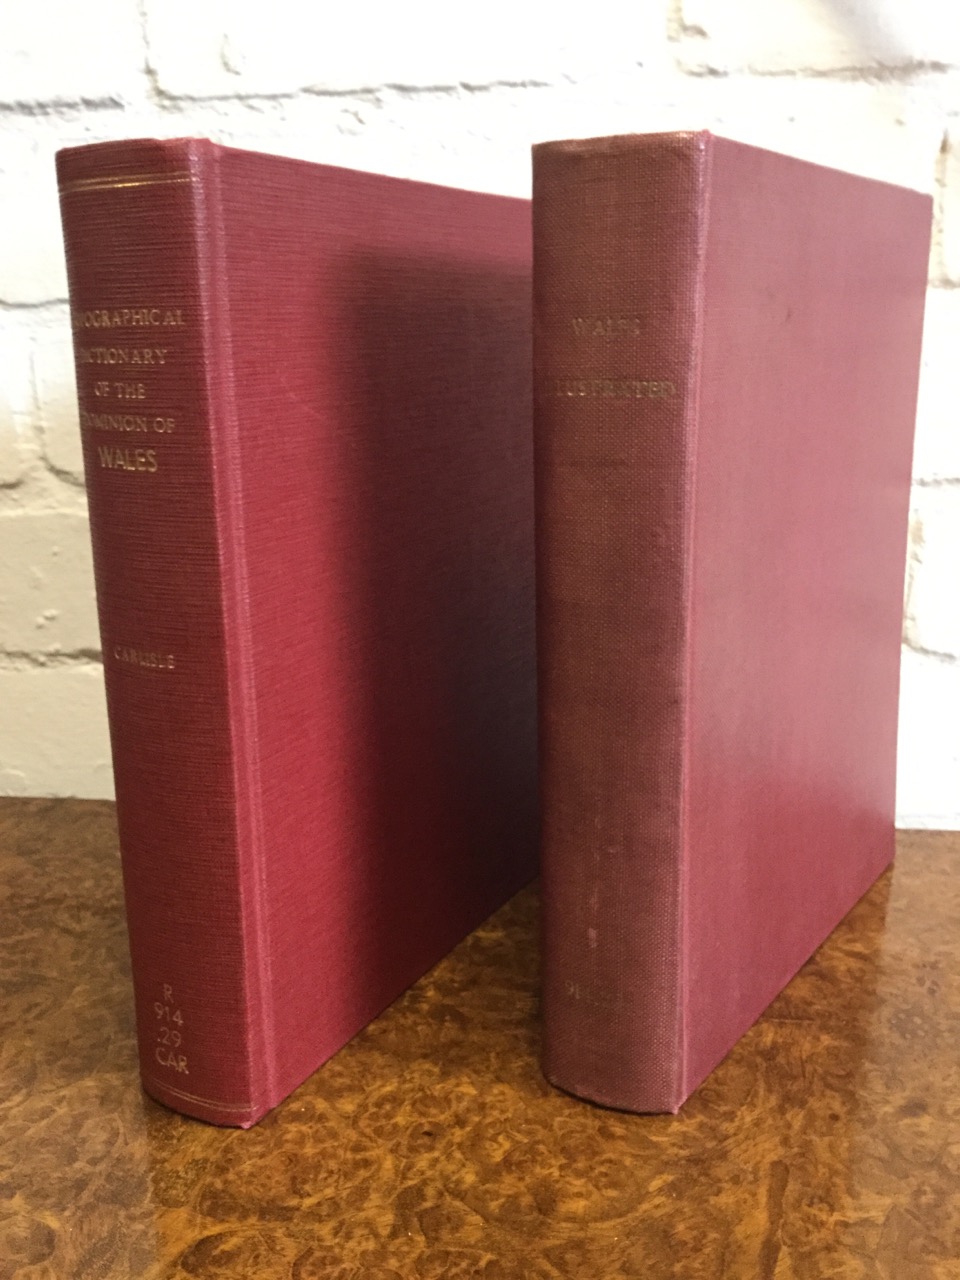 The Topographical Dictionary of the Dominion of Wales by Nicholas Carlisle, published in 1811, a